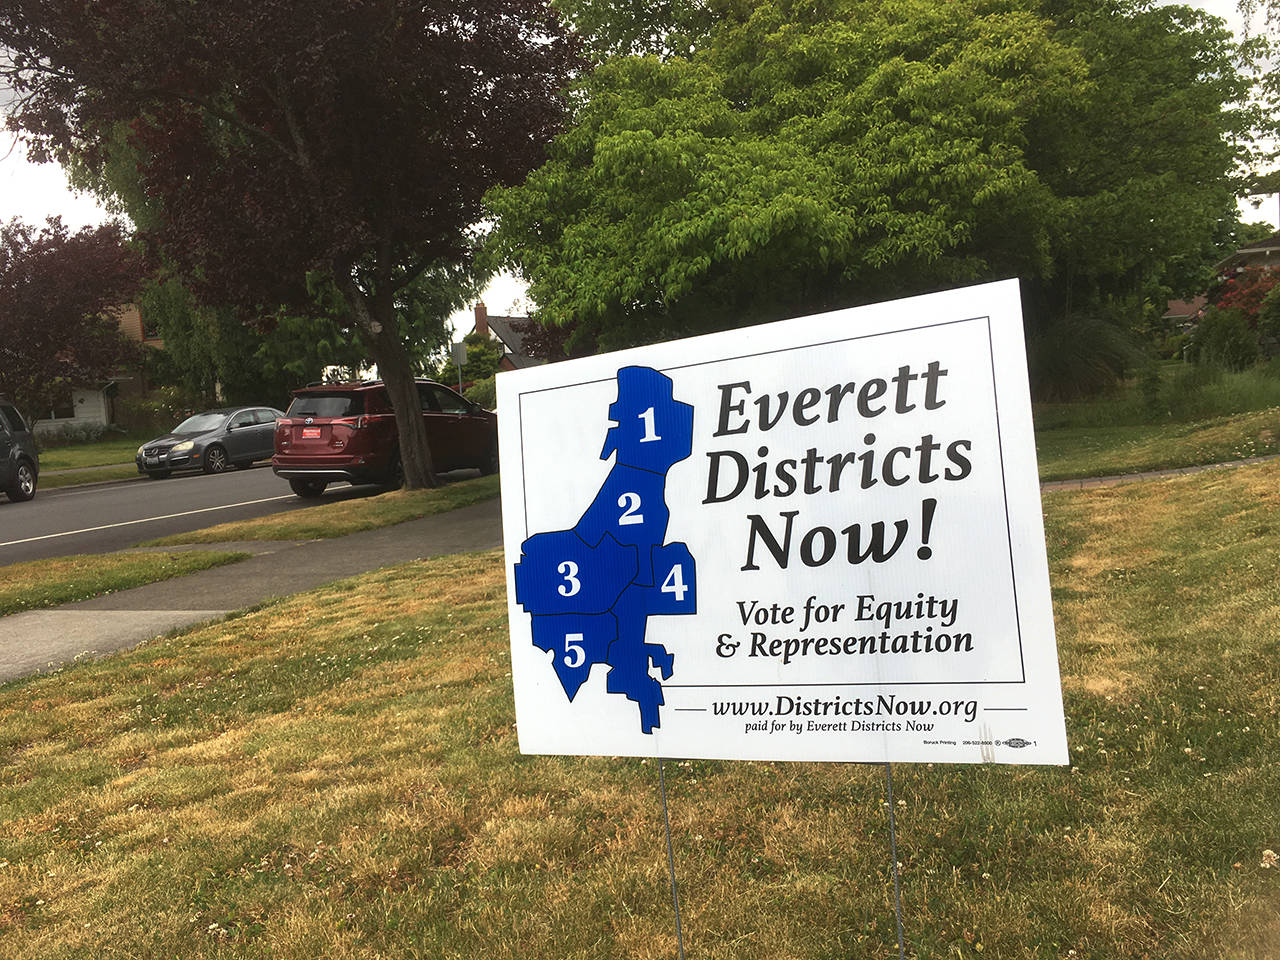 Some residents of Everett are showing their support for splitting the Everett City Council representation into geographic districts by displaying yard signs, such as this one seen on Rucker Ave. on Thursday. (Sue Misao / The Herald)